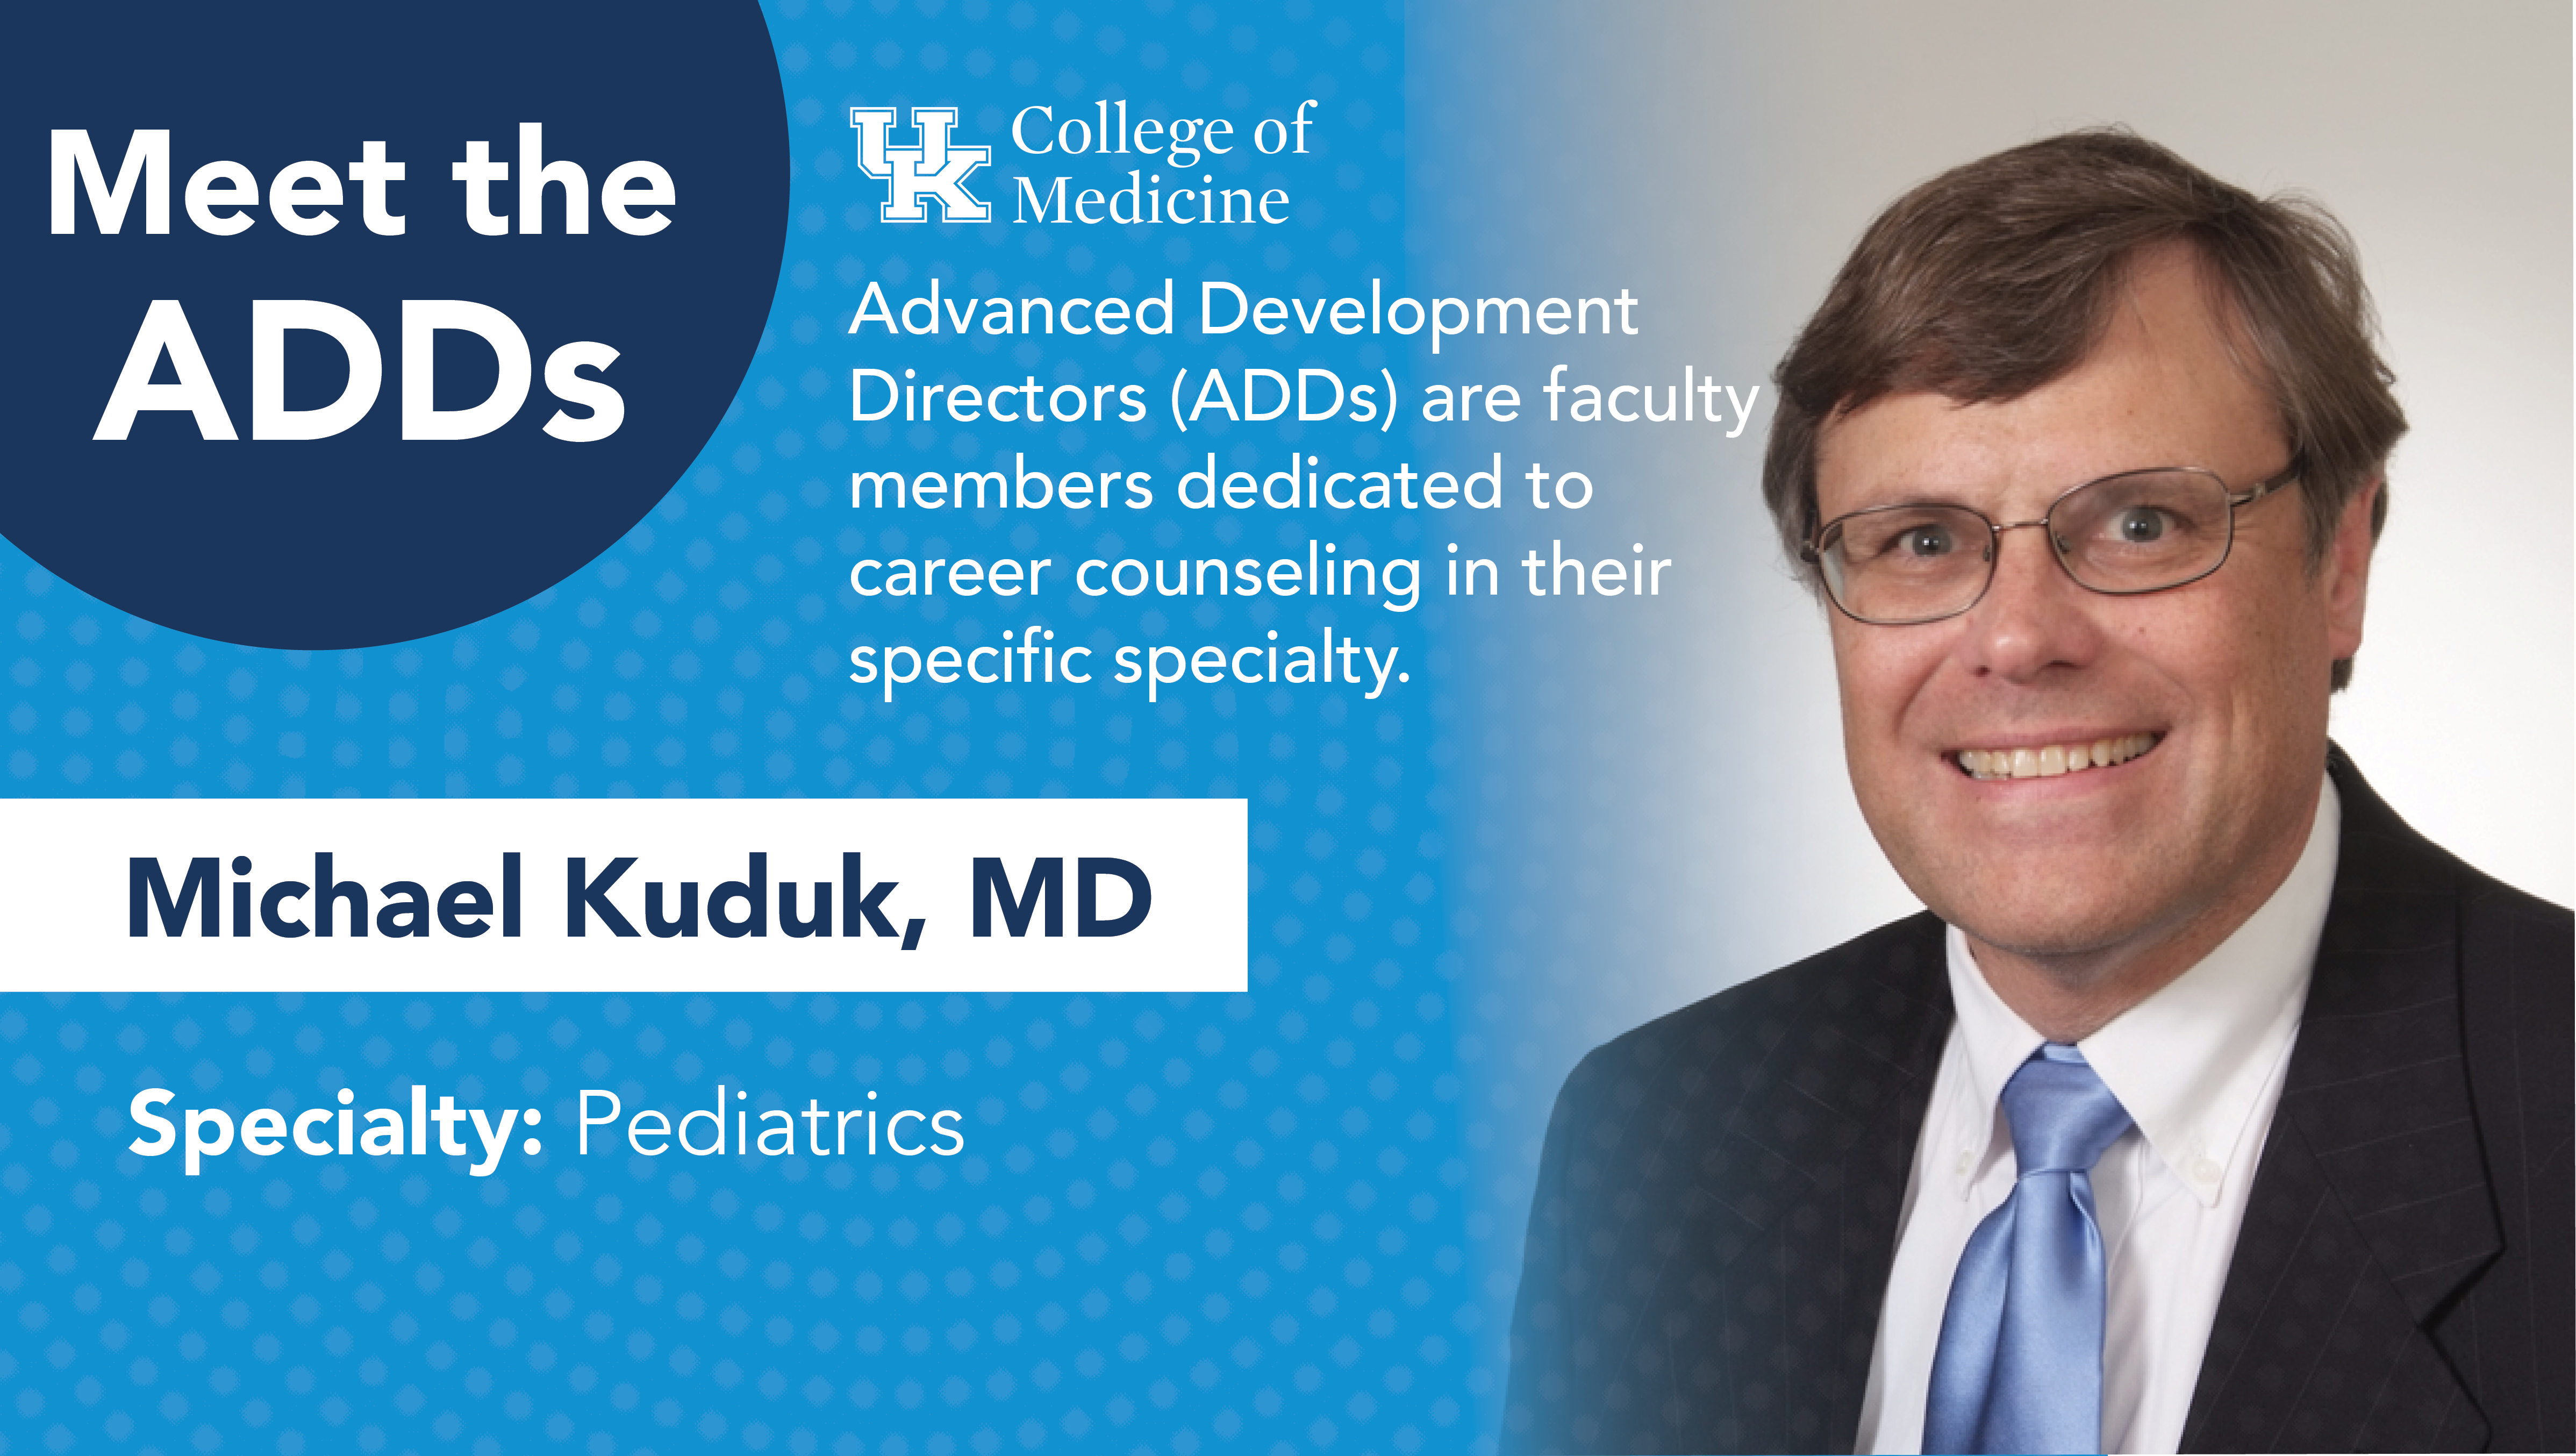 Meet the ADDs Spotlight on Dr. Michael Kuduk, who specializes in pediatrics.